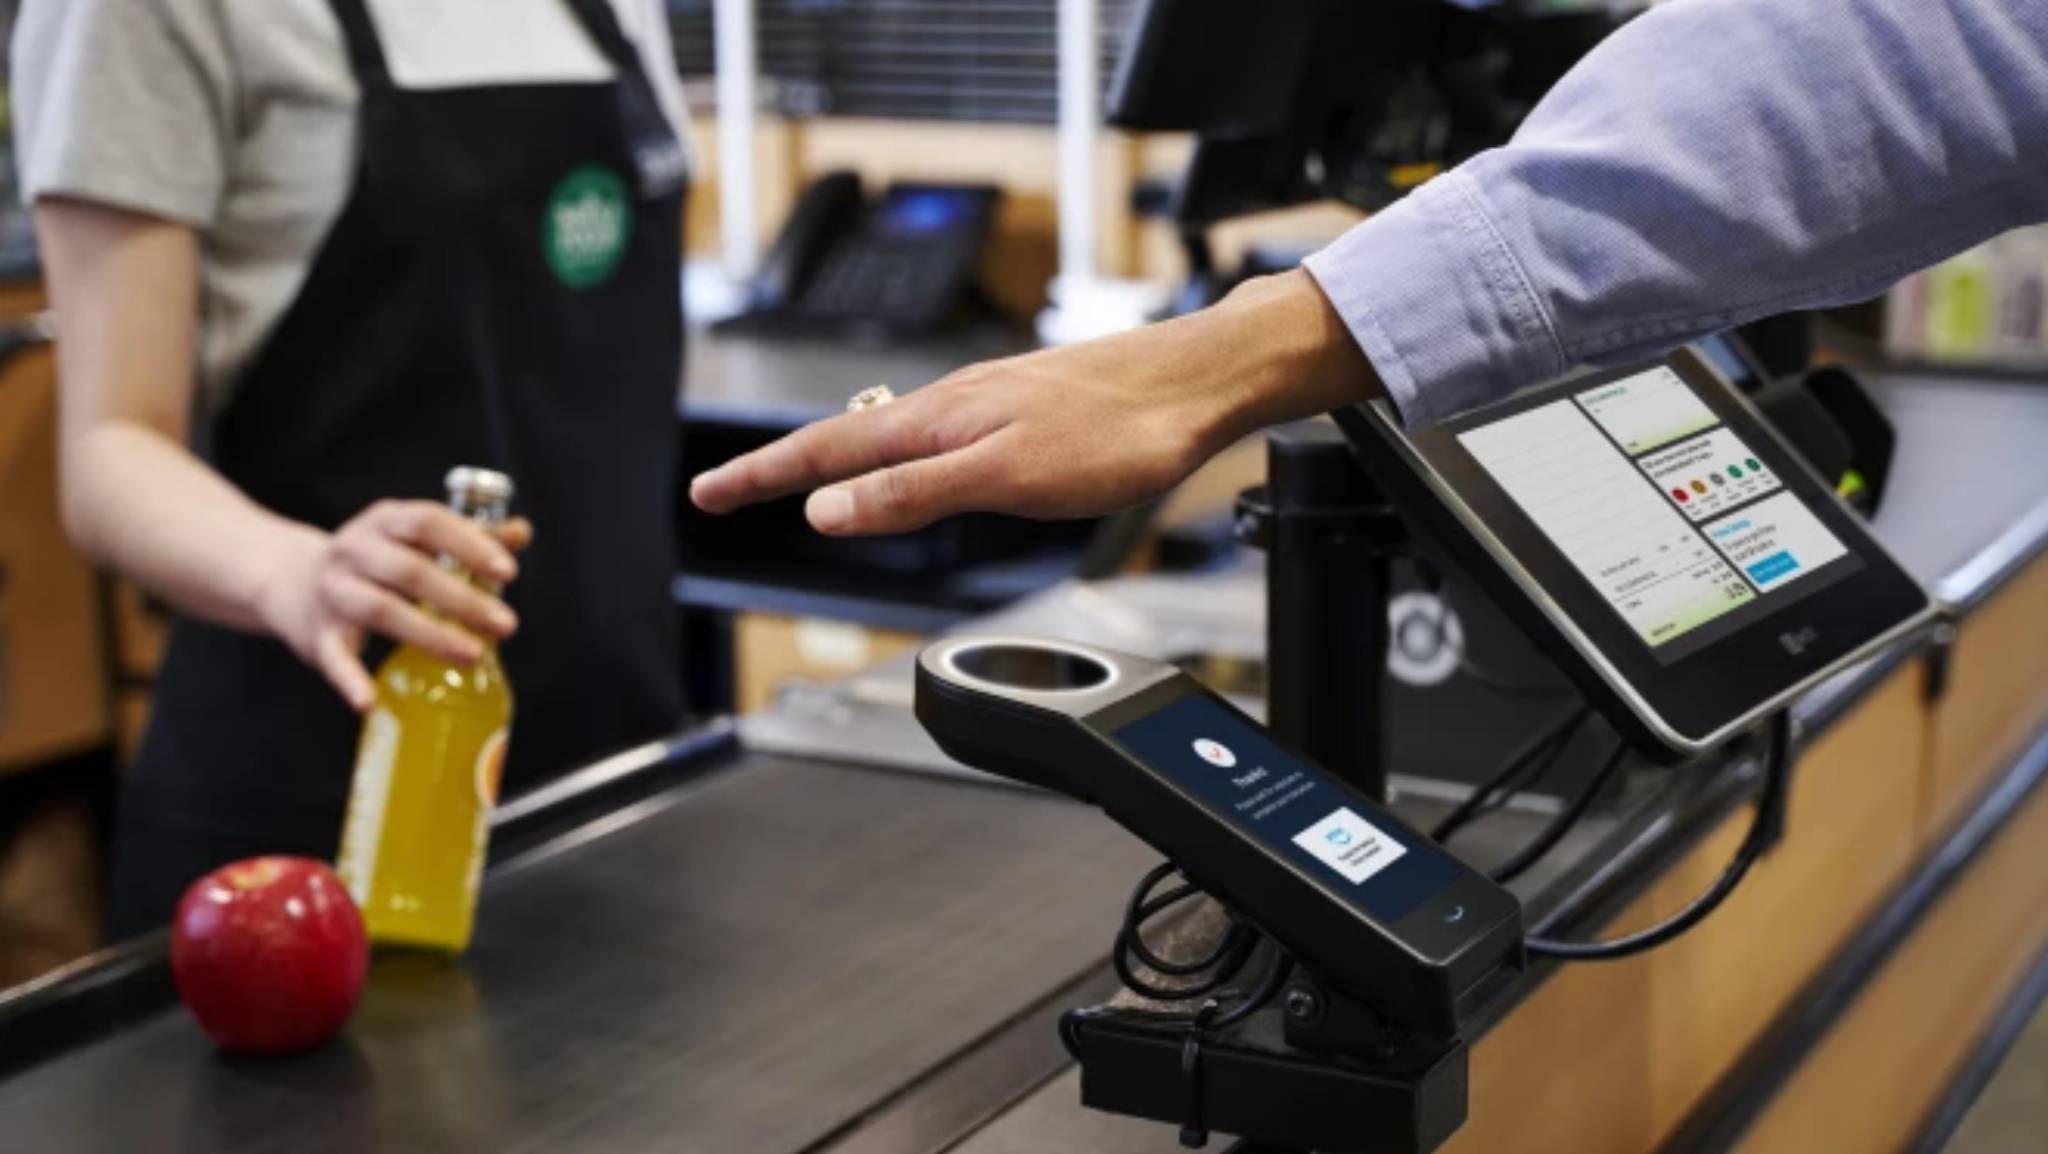 Amazon rolls out biometric payments at Whole Foods